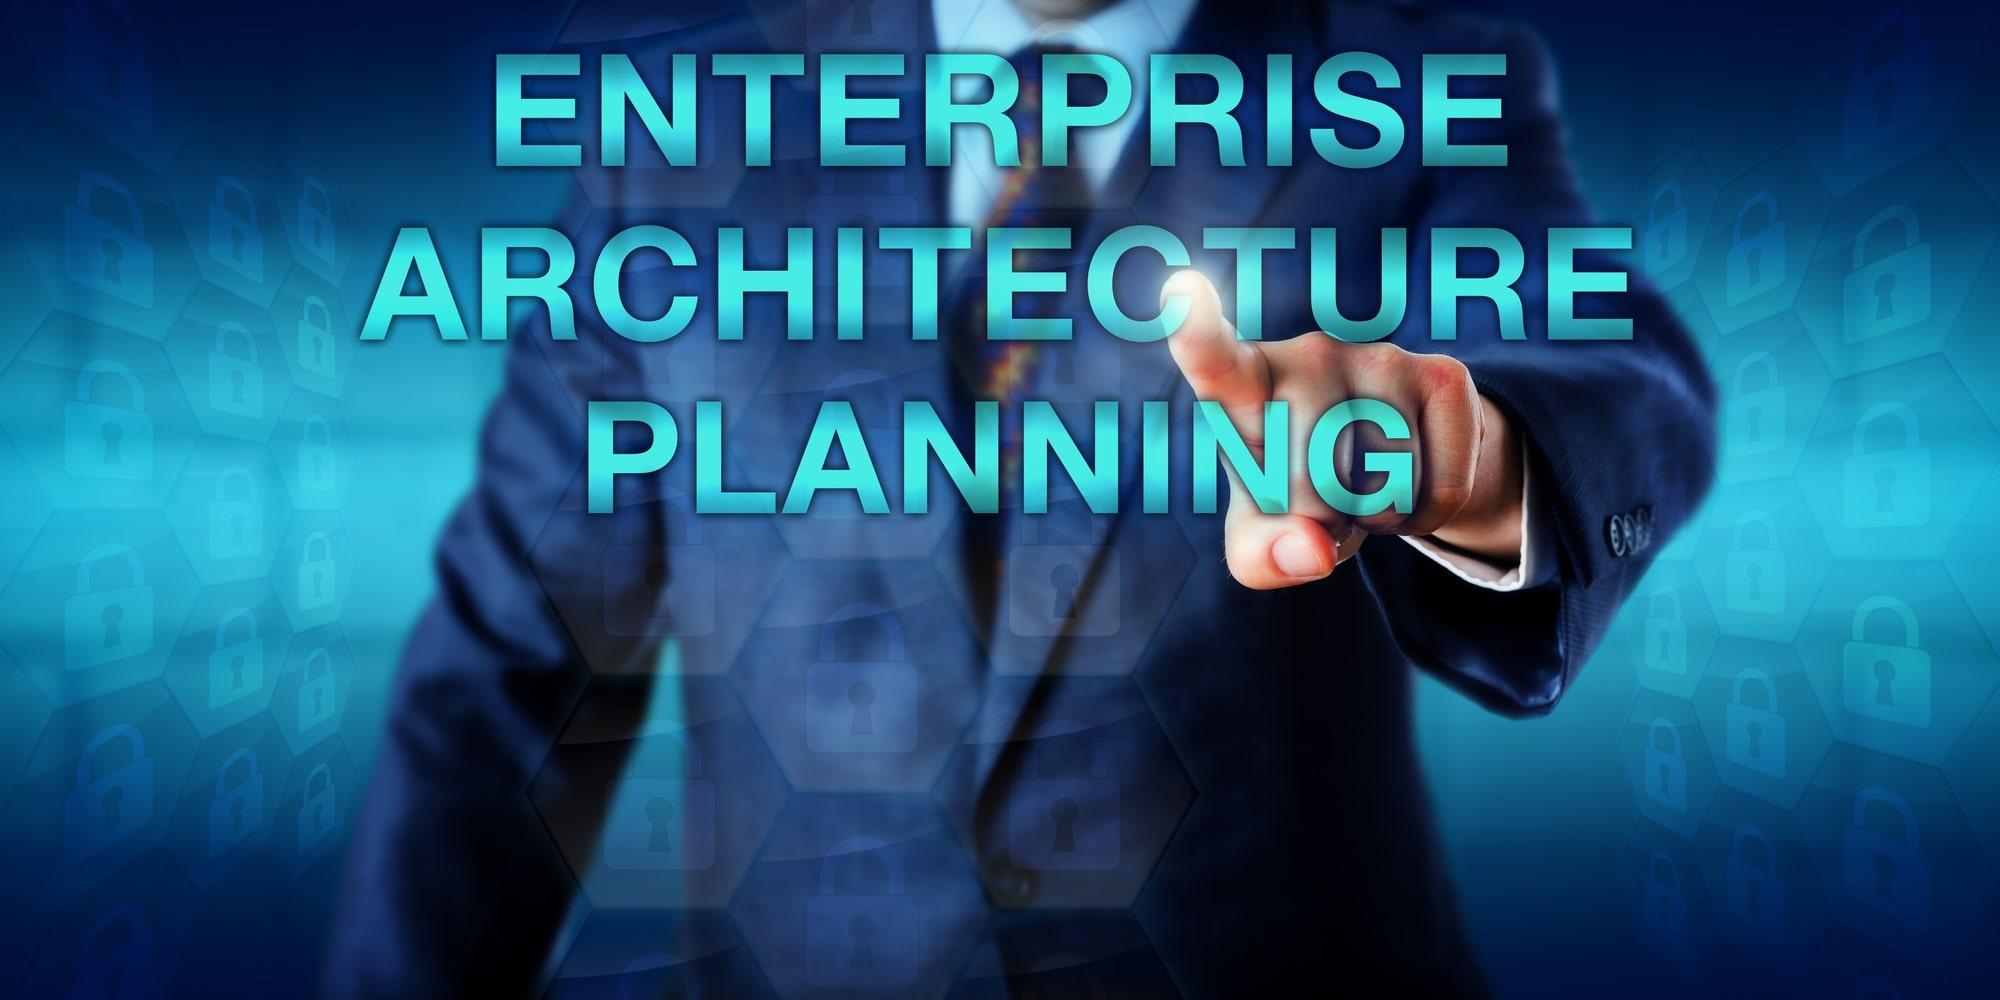 Enterprise Architecture Tools and Training: What You Need to Know